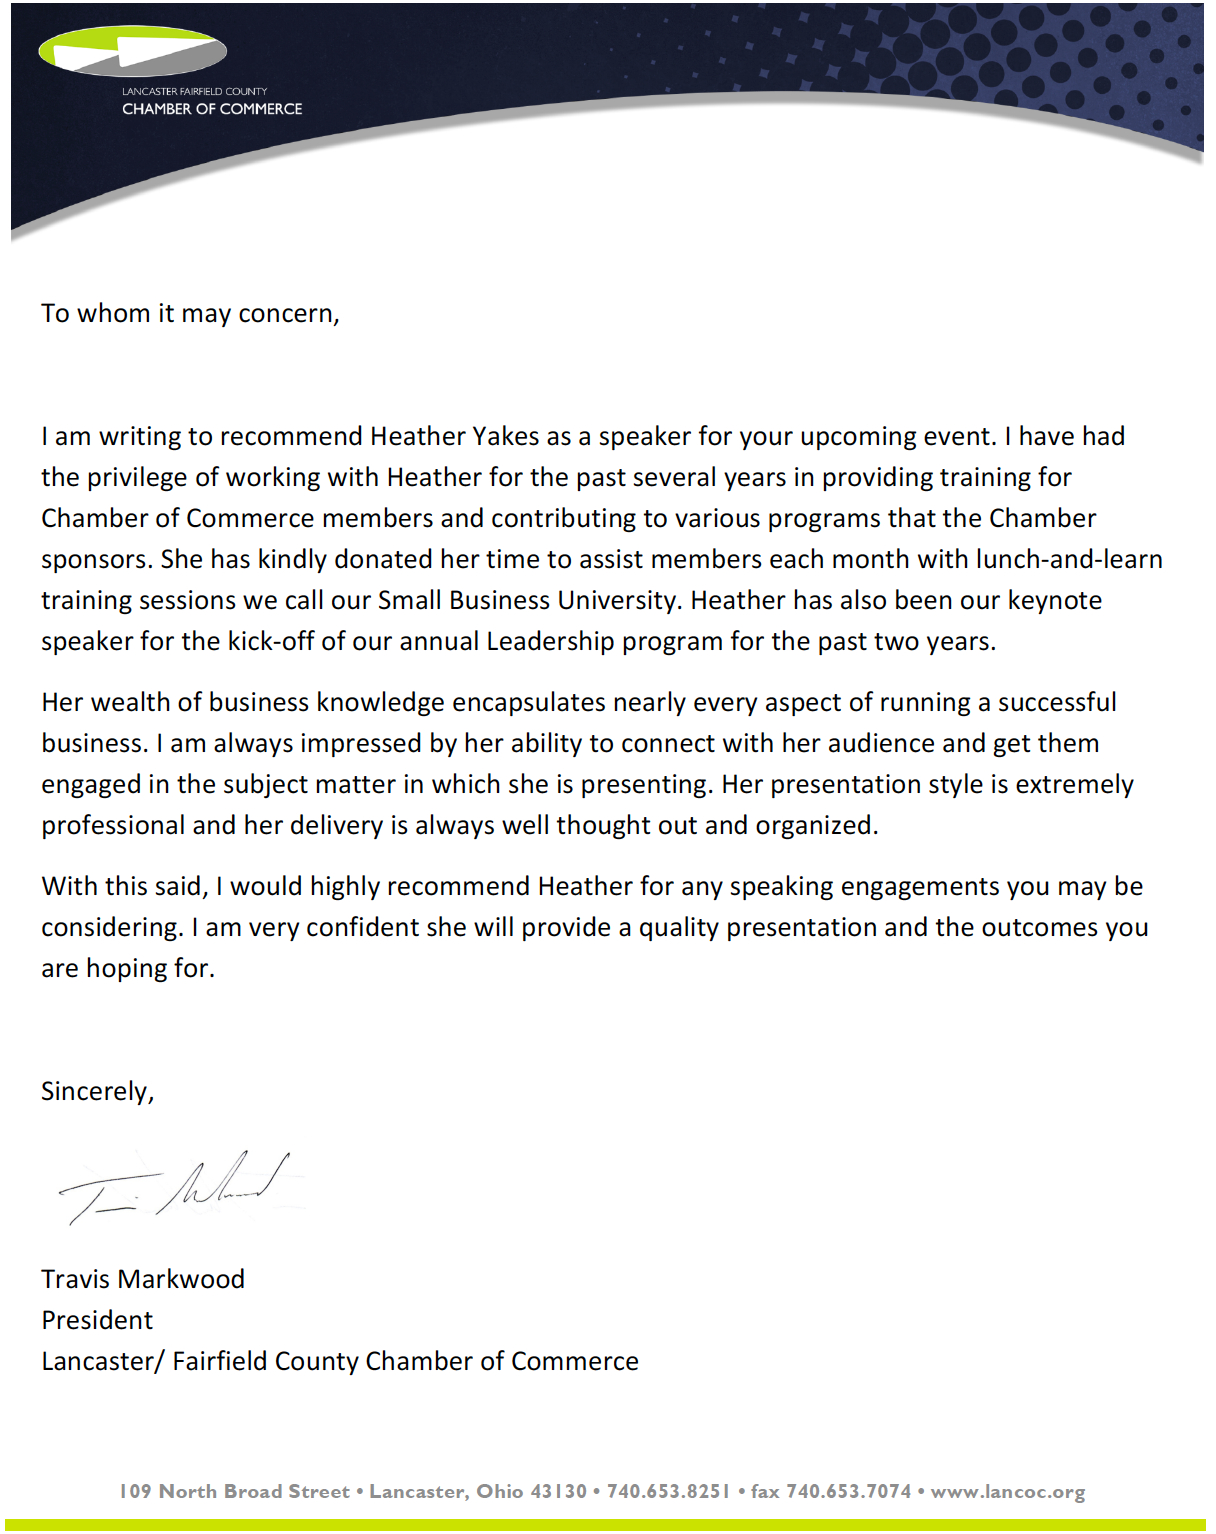 Letter Of Recommendation From Lancaster Columbus Business regarding dimensions 1216 X 1534